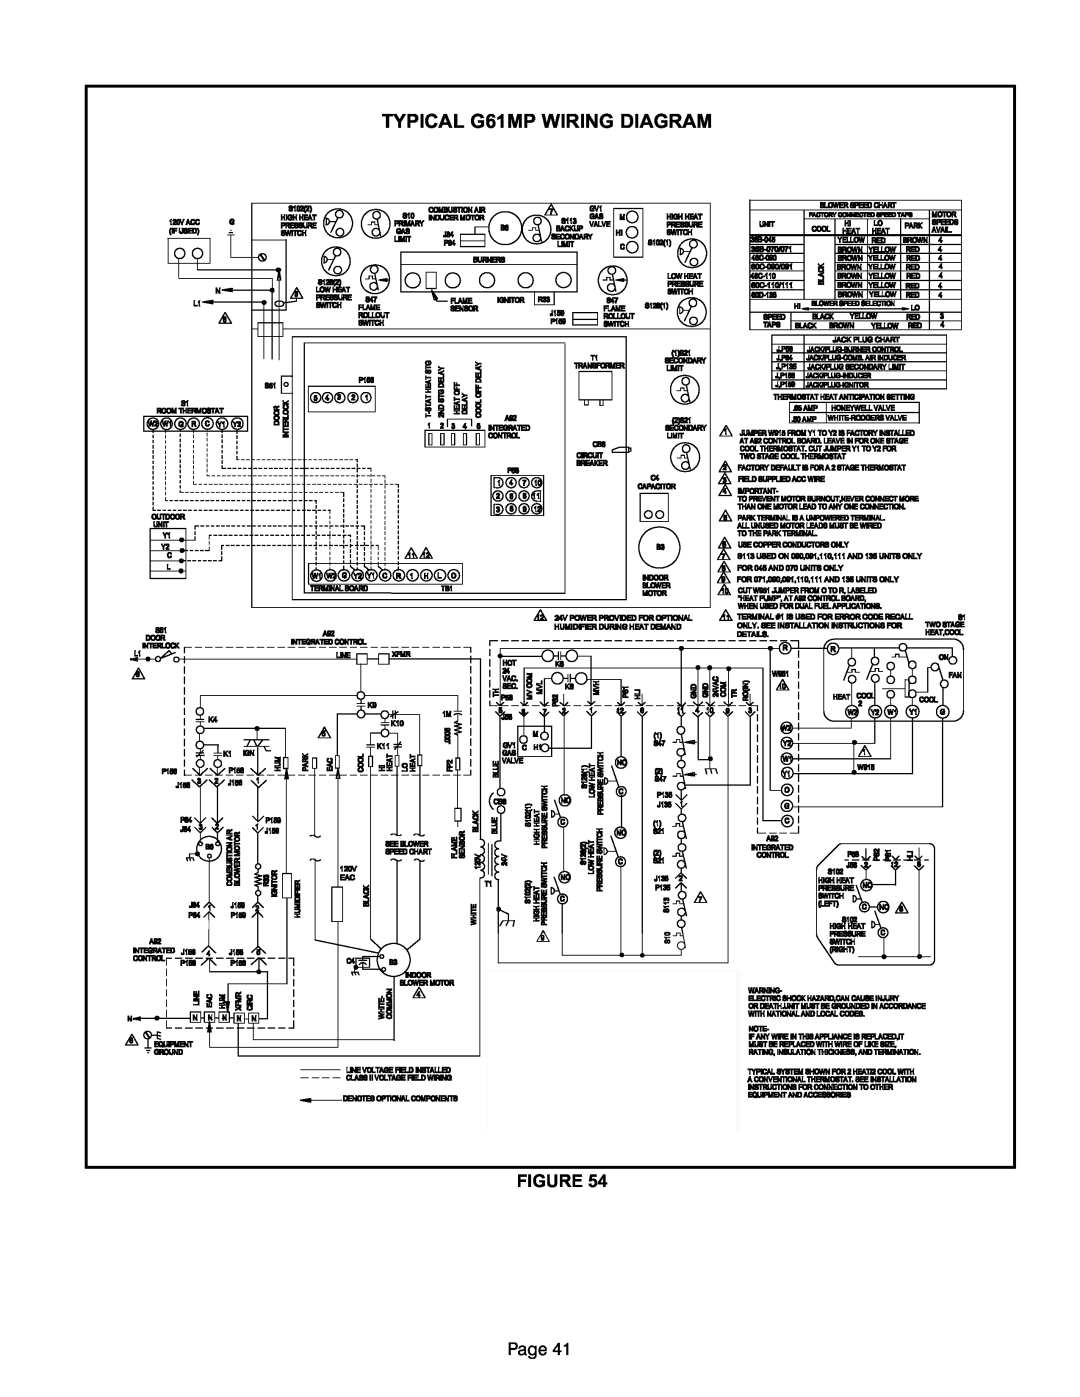 Lennox International Inc G61MP Series Units, Gas Units installation instructions TYPICAL G61MP WIRING DIAGRAM, FIGURE Page 